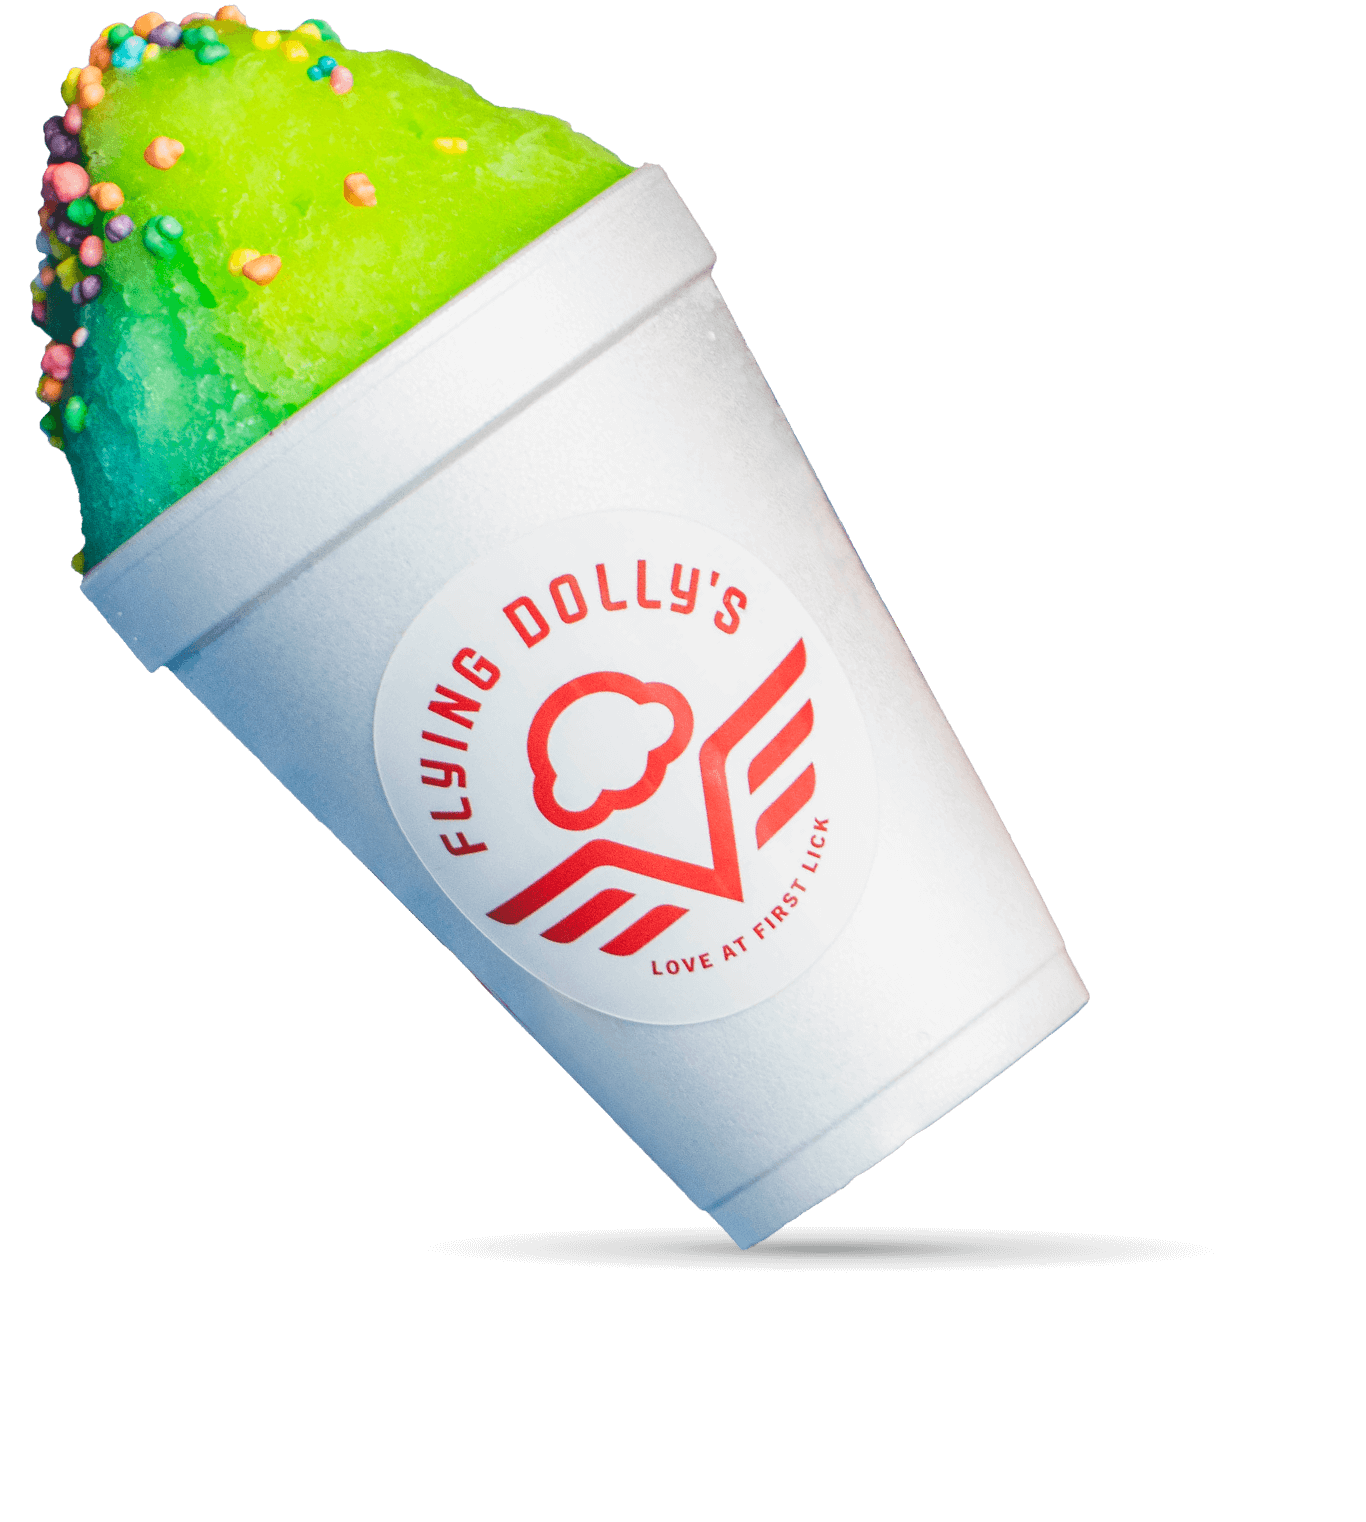 Let your taste buds fly with New Orleans style snoballs.